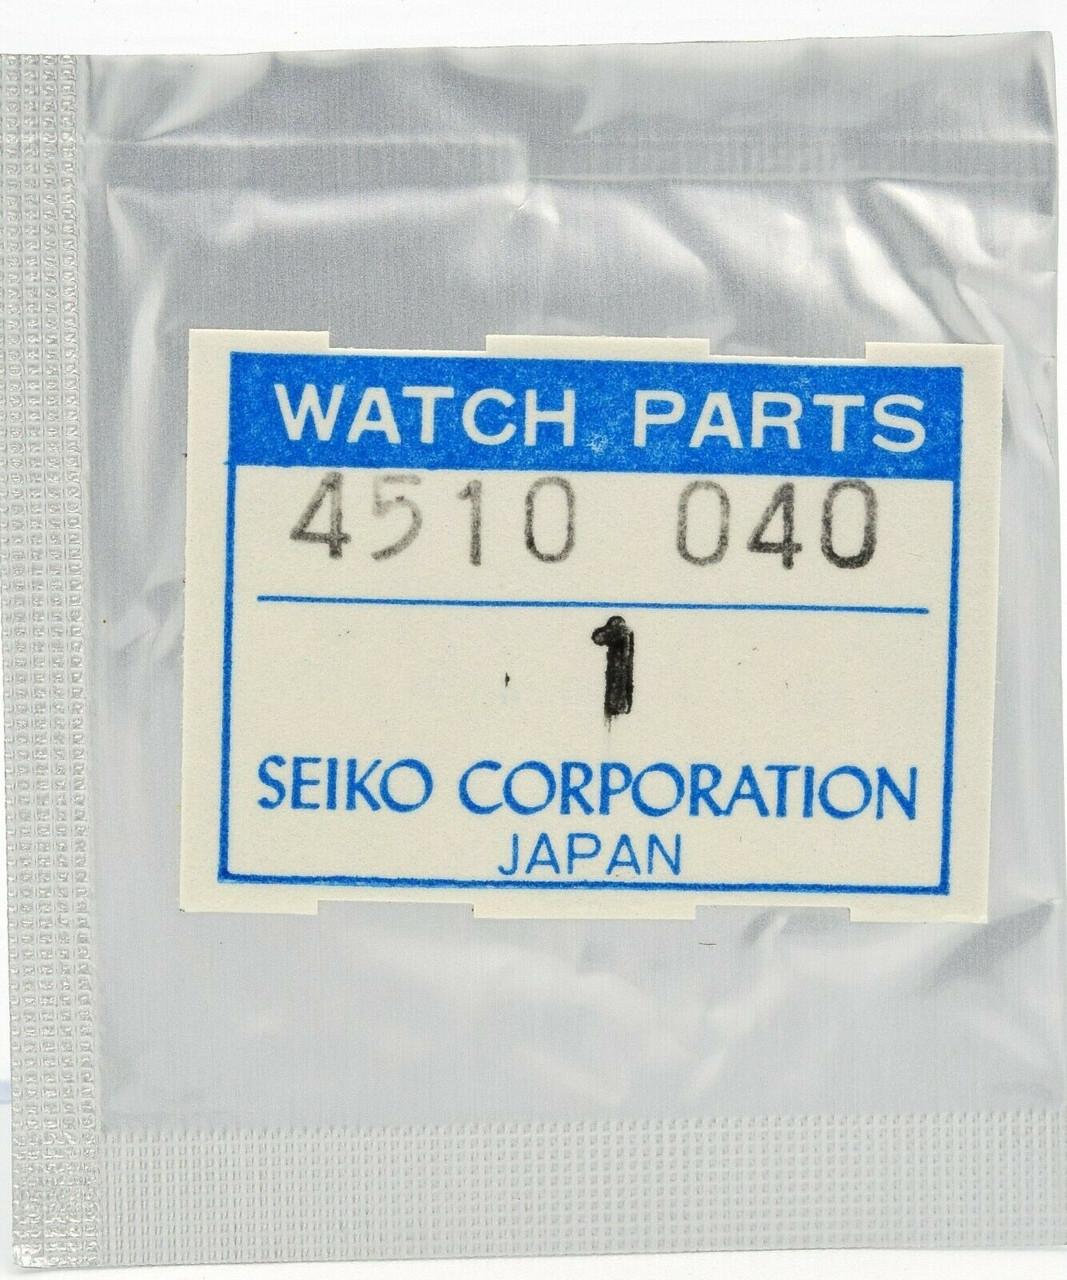 LCD Panel 4510 040 For Digital Watch Movements